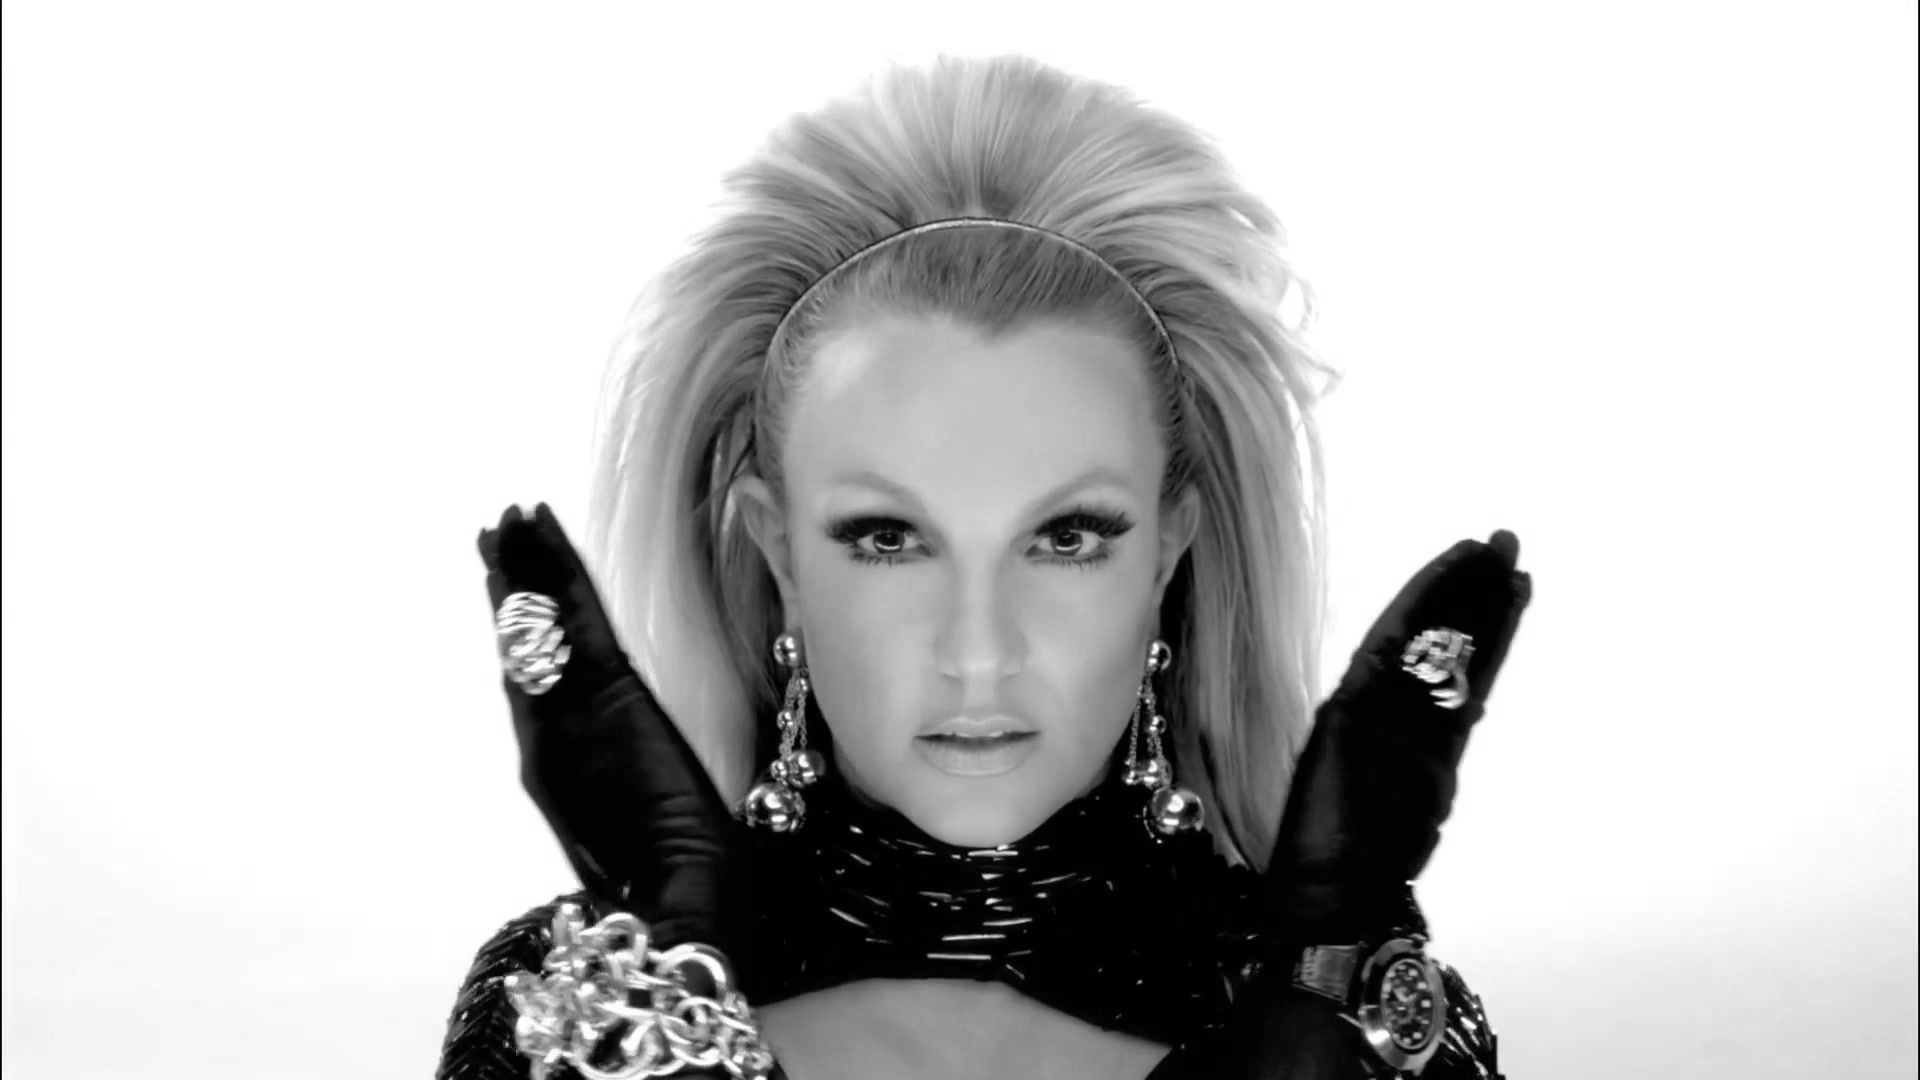 will_i_am_-_Scream___Shout_ft__Britney_Spears_0072